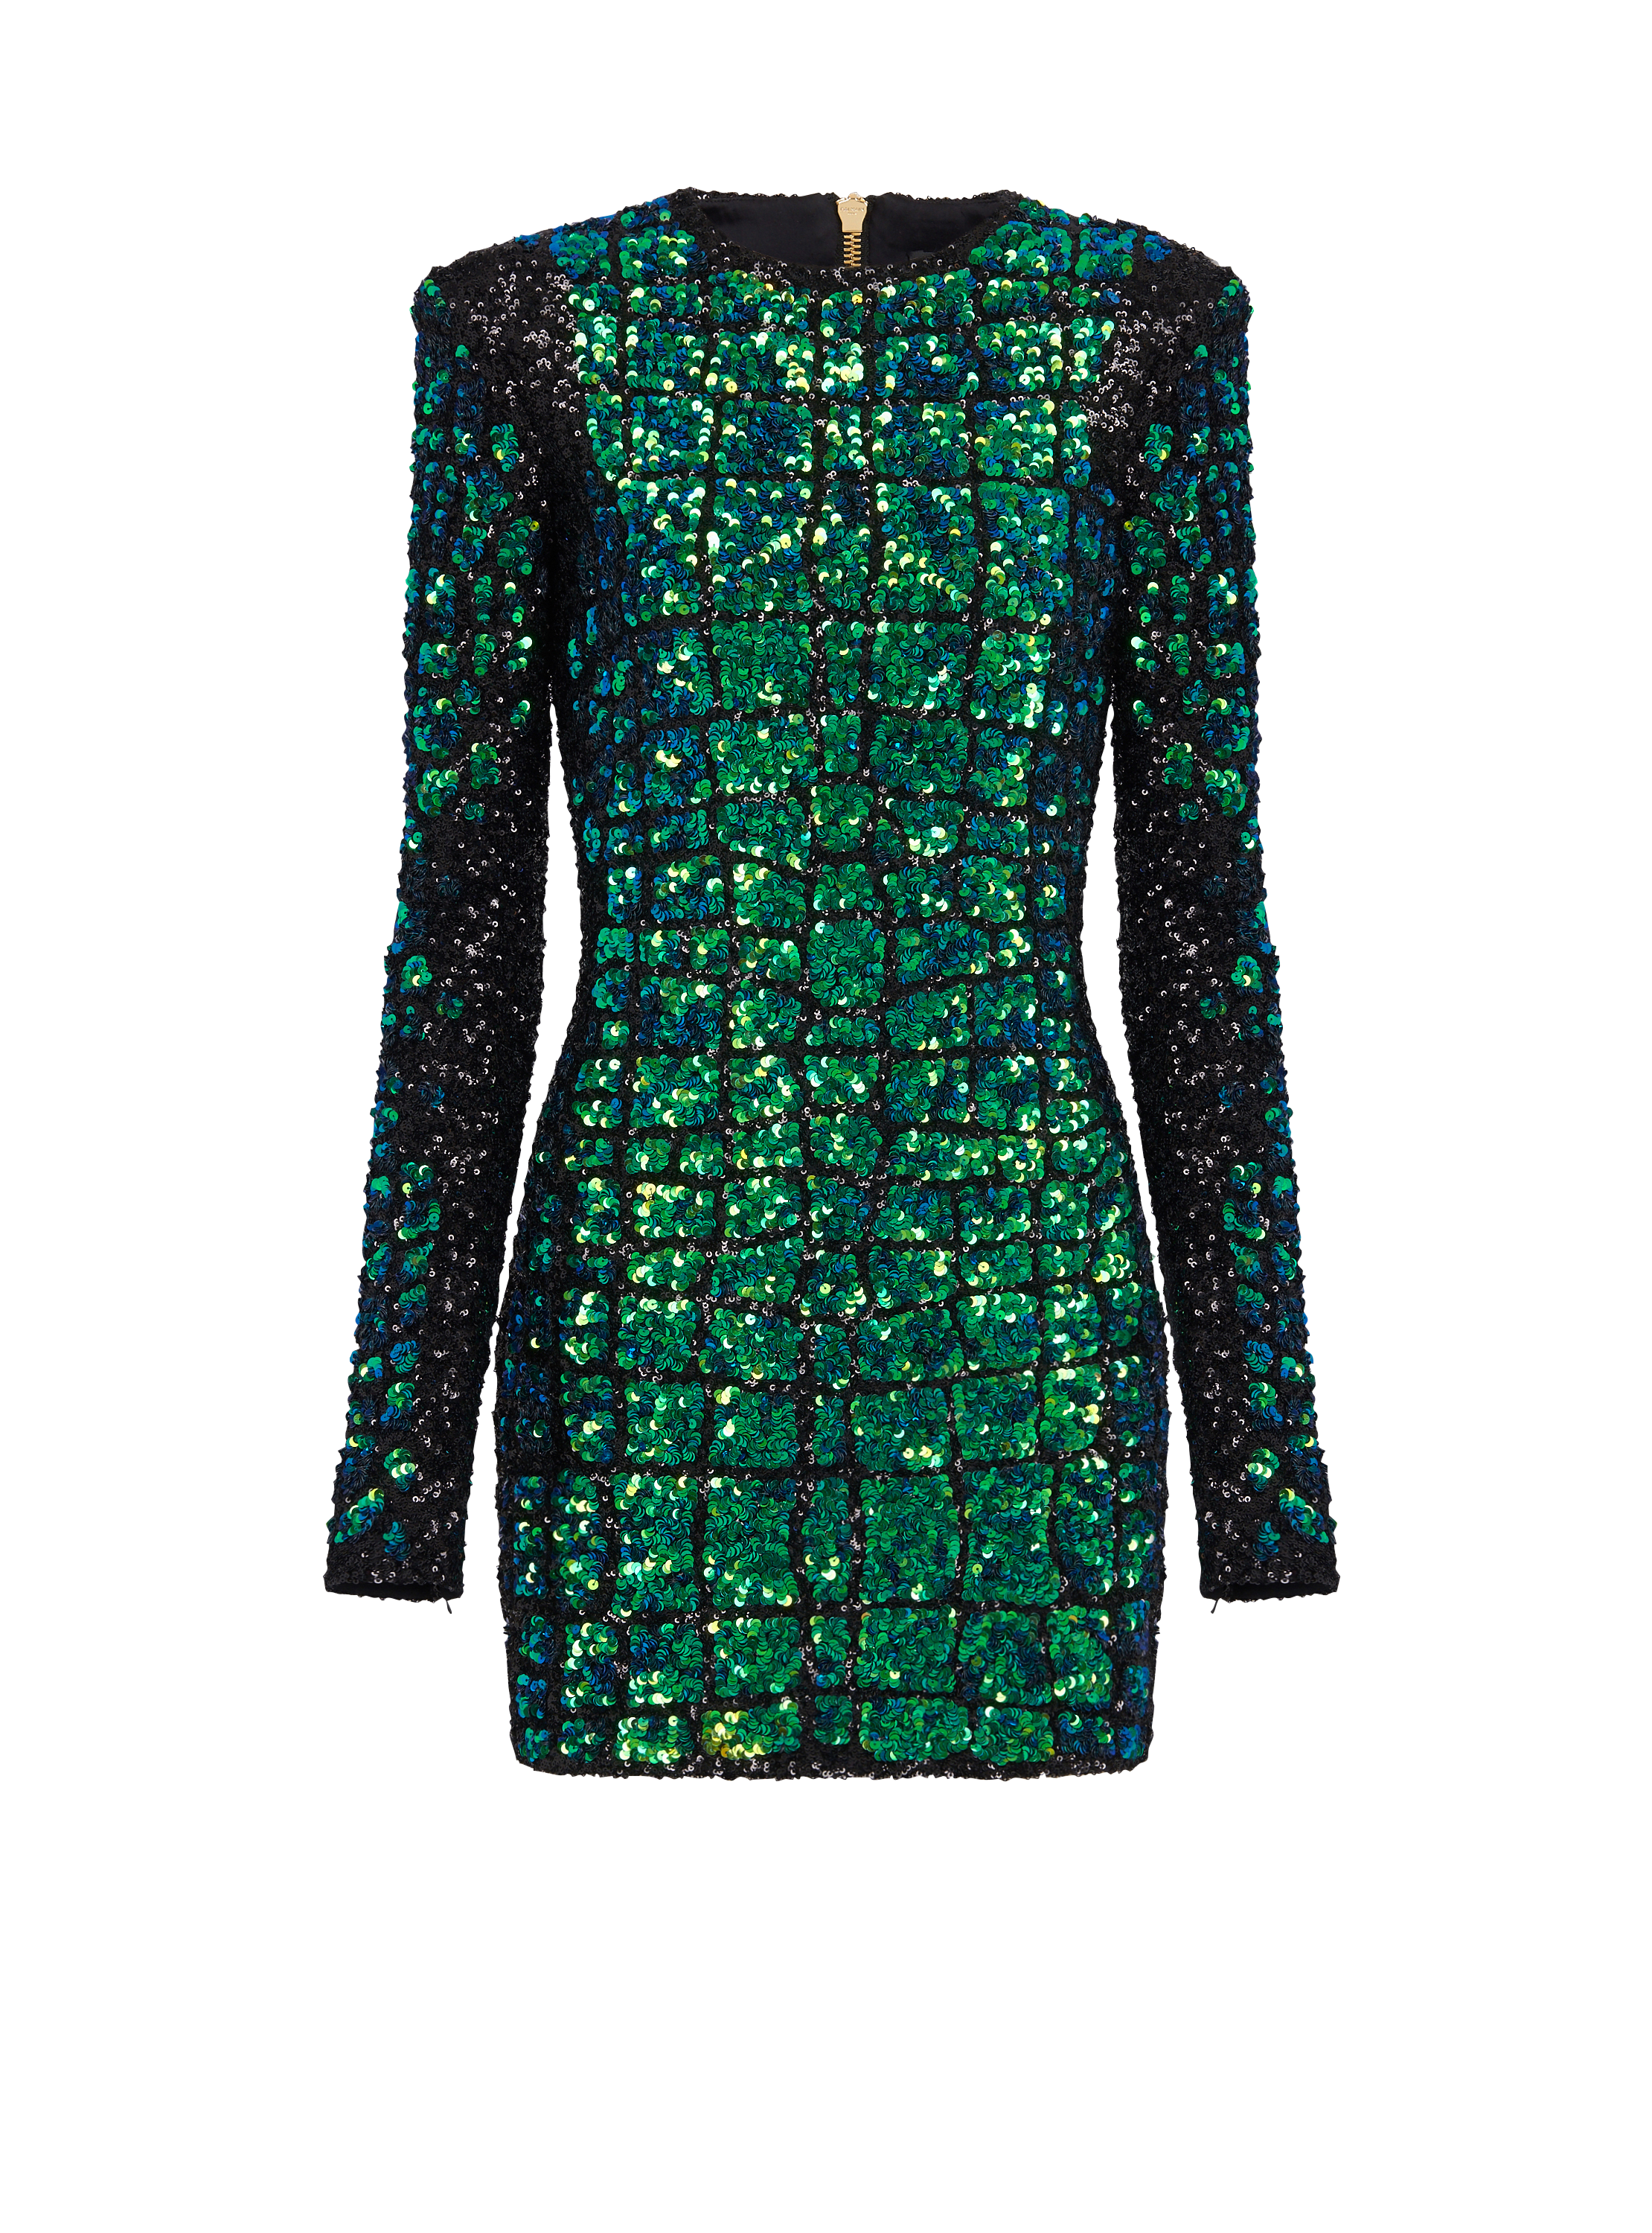 Iridescent crocodile effect embroidered dress, green, hi-res